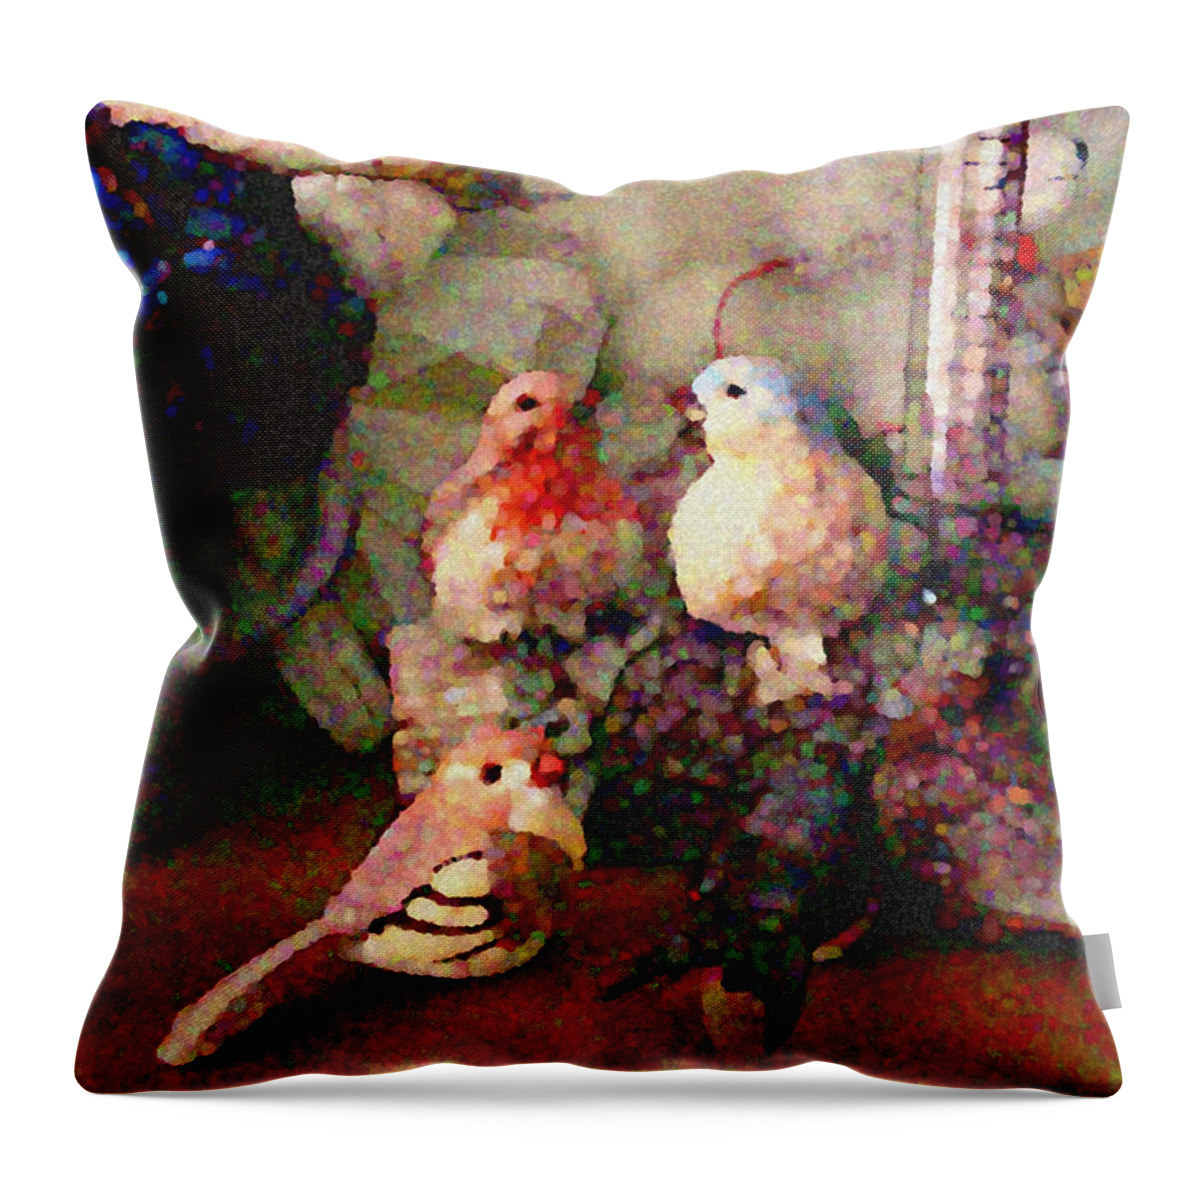 Birds Throw Pillow featuring the photograph CC1 by Costanza Canali